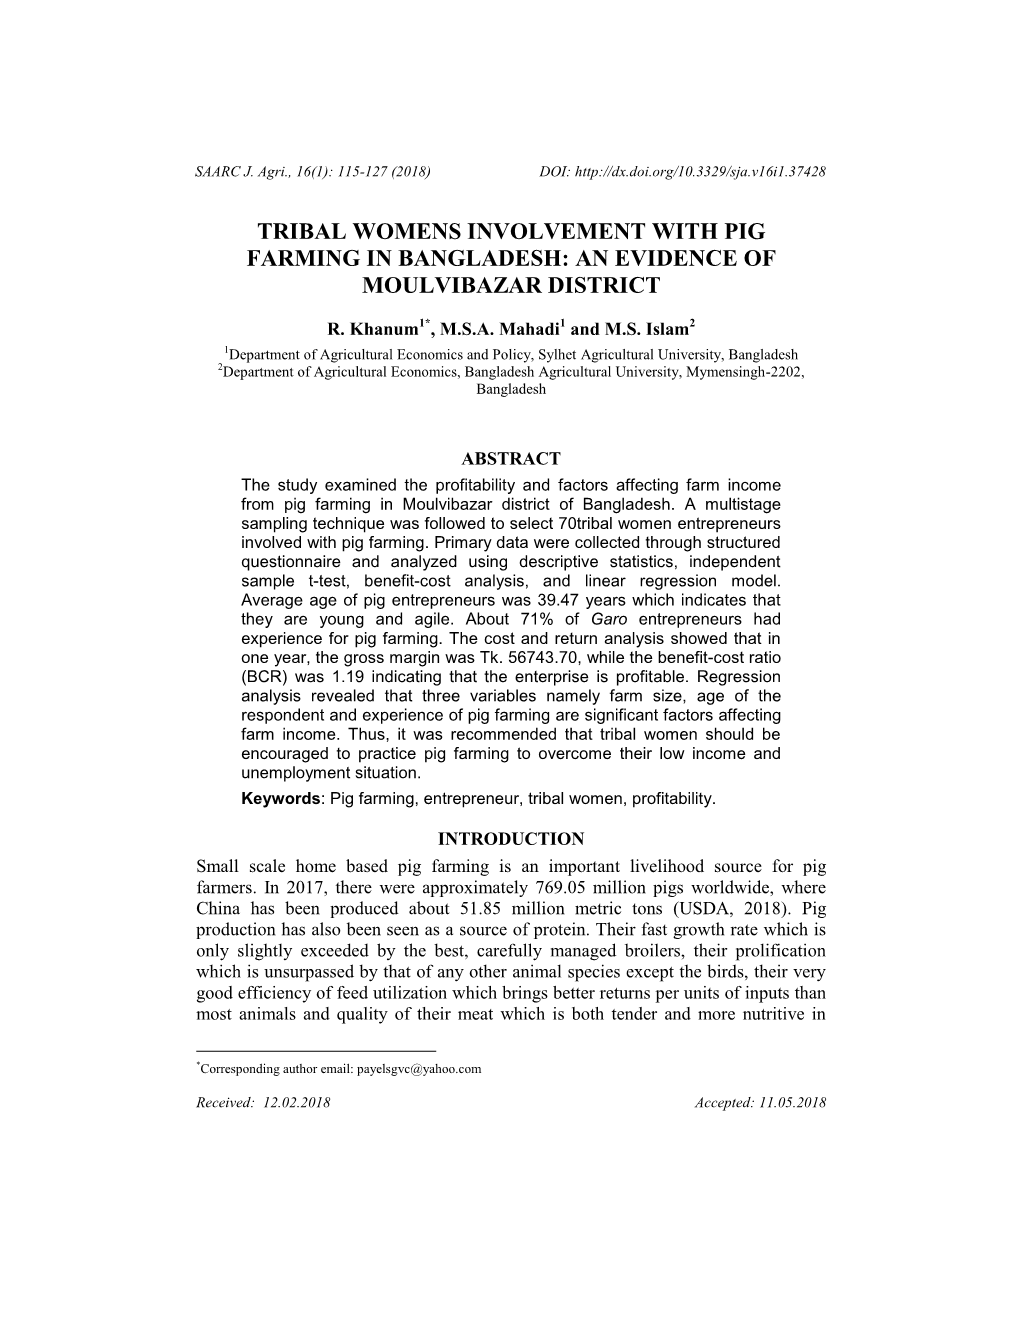 Tribal Womens Involvement with Pig Farming in Bangladesh: an Evidence of Moulvibazar District